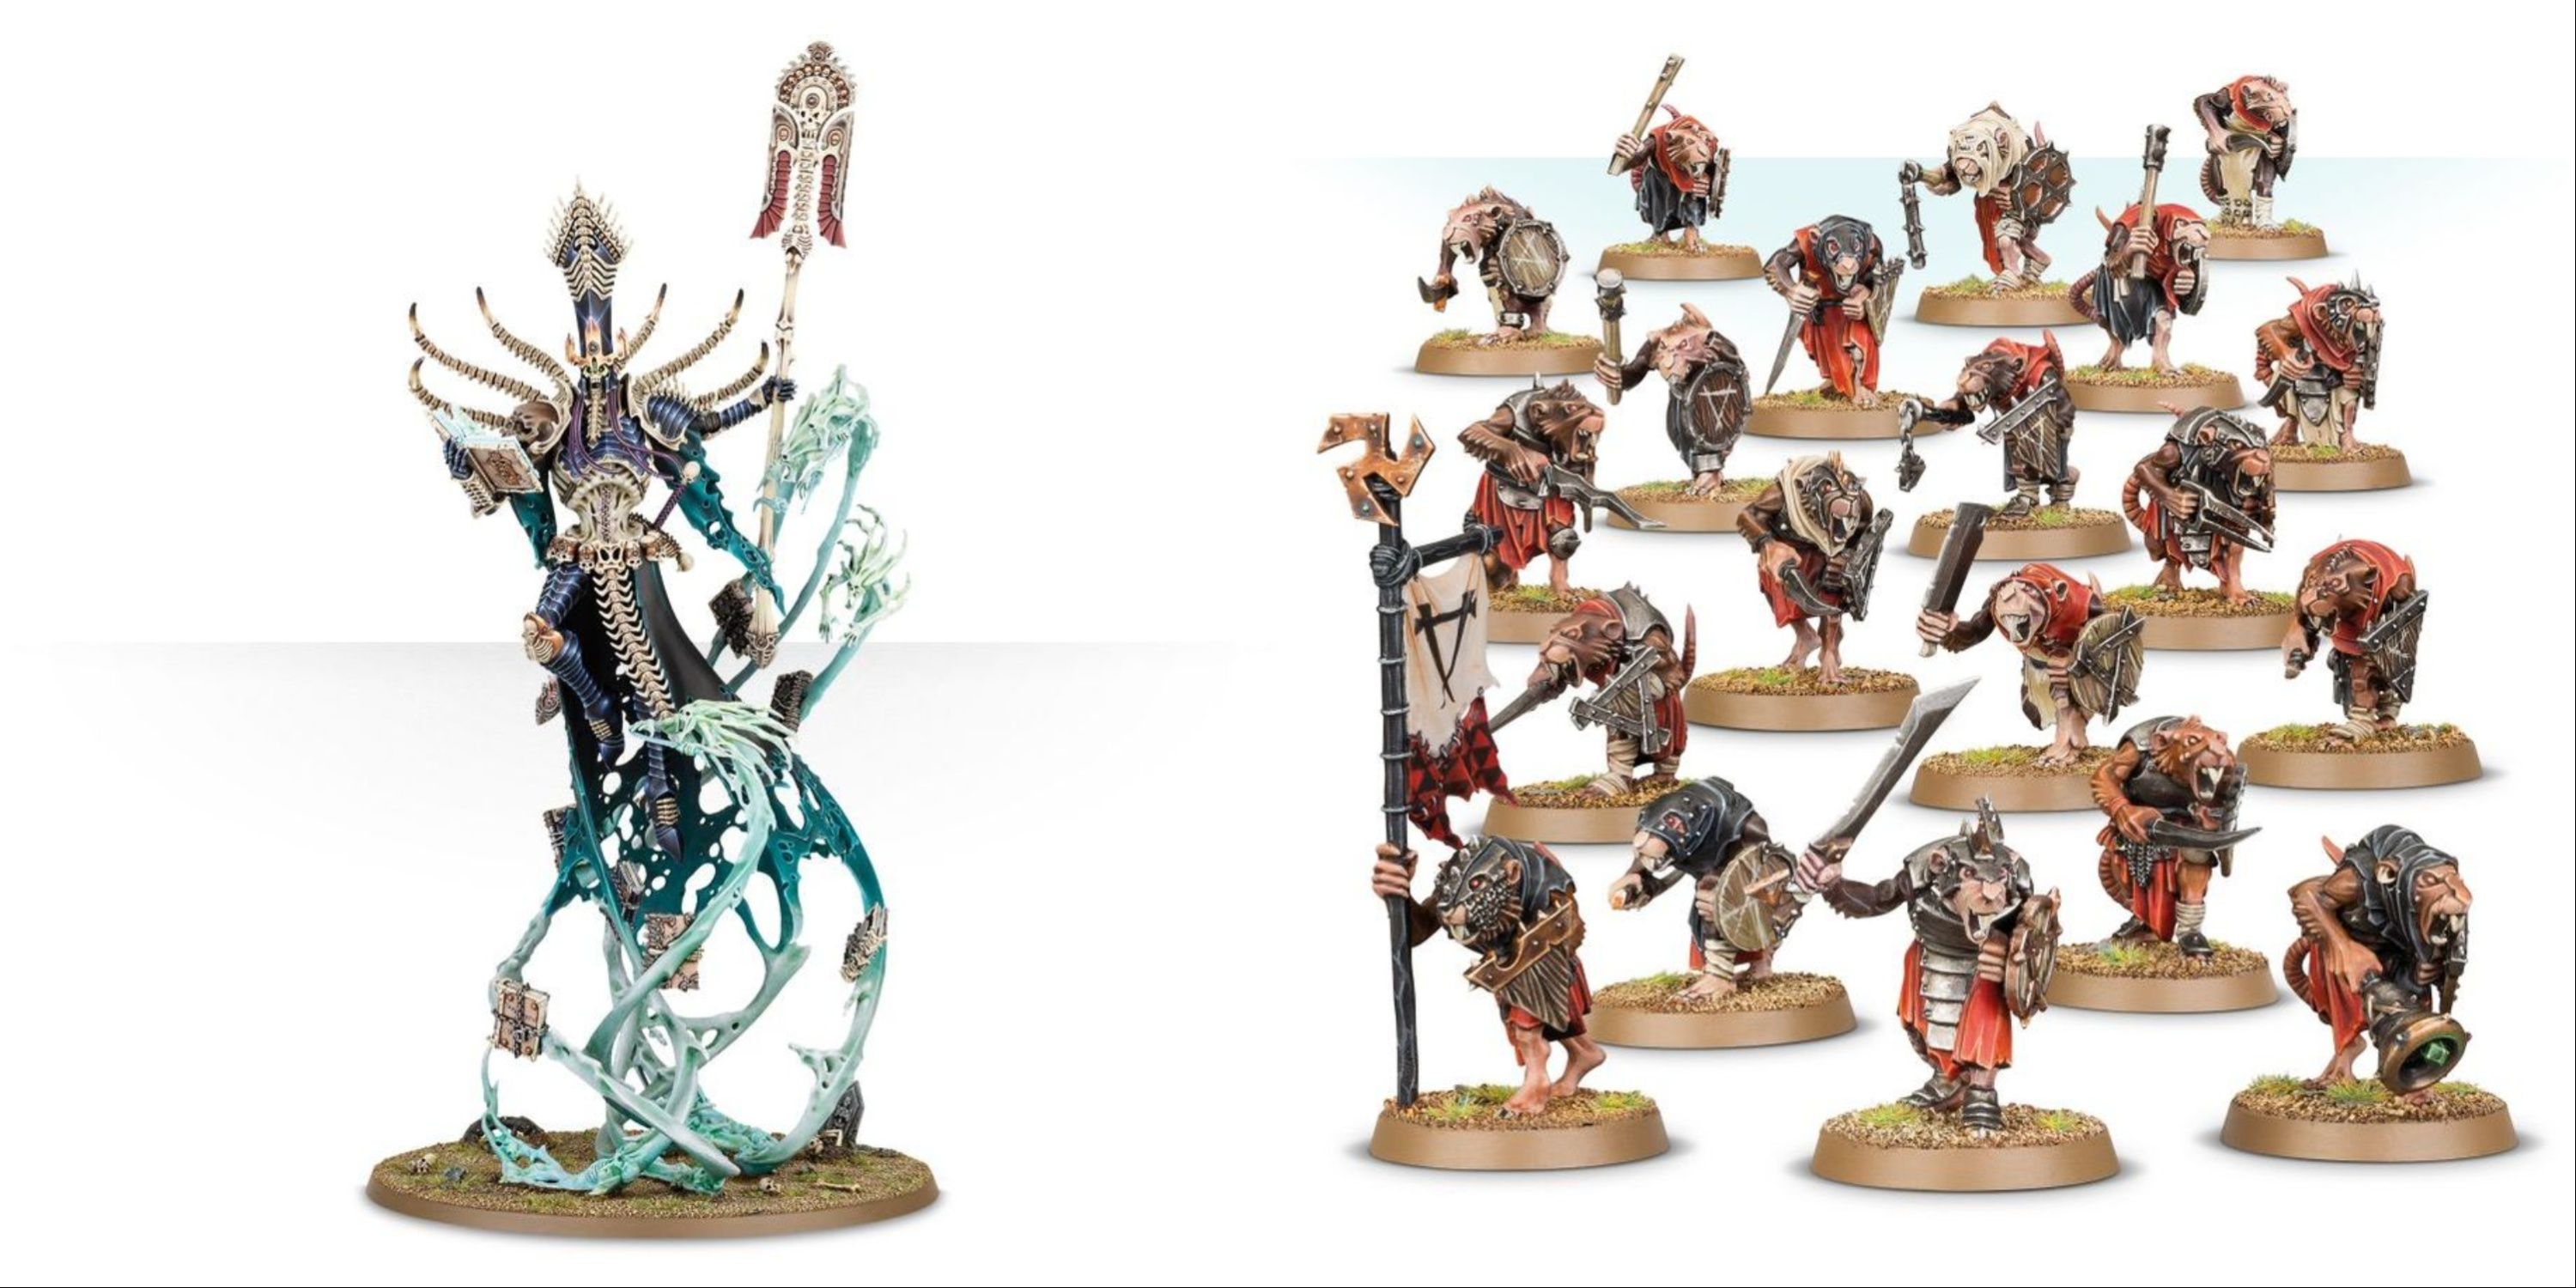 Warhammer Models, Nagash, Lord of Undeath and a unit of Skaven Clanrats